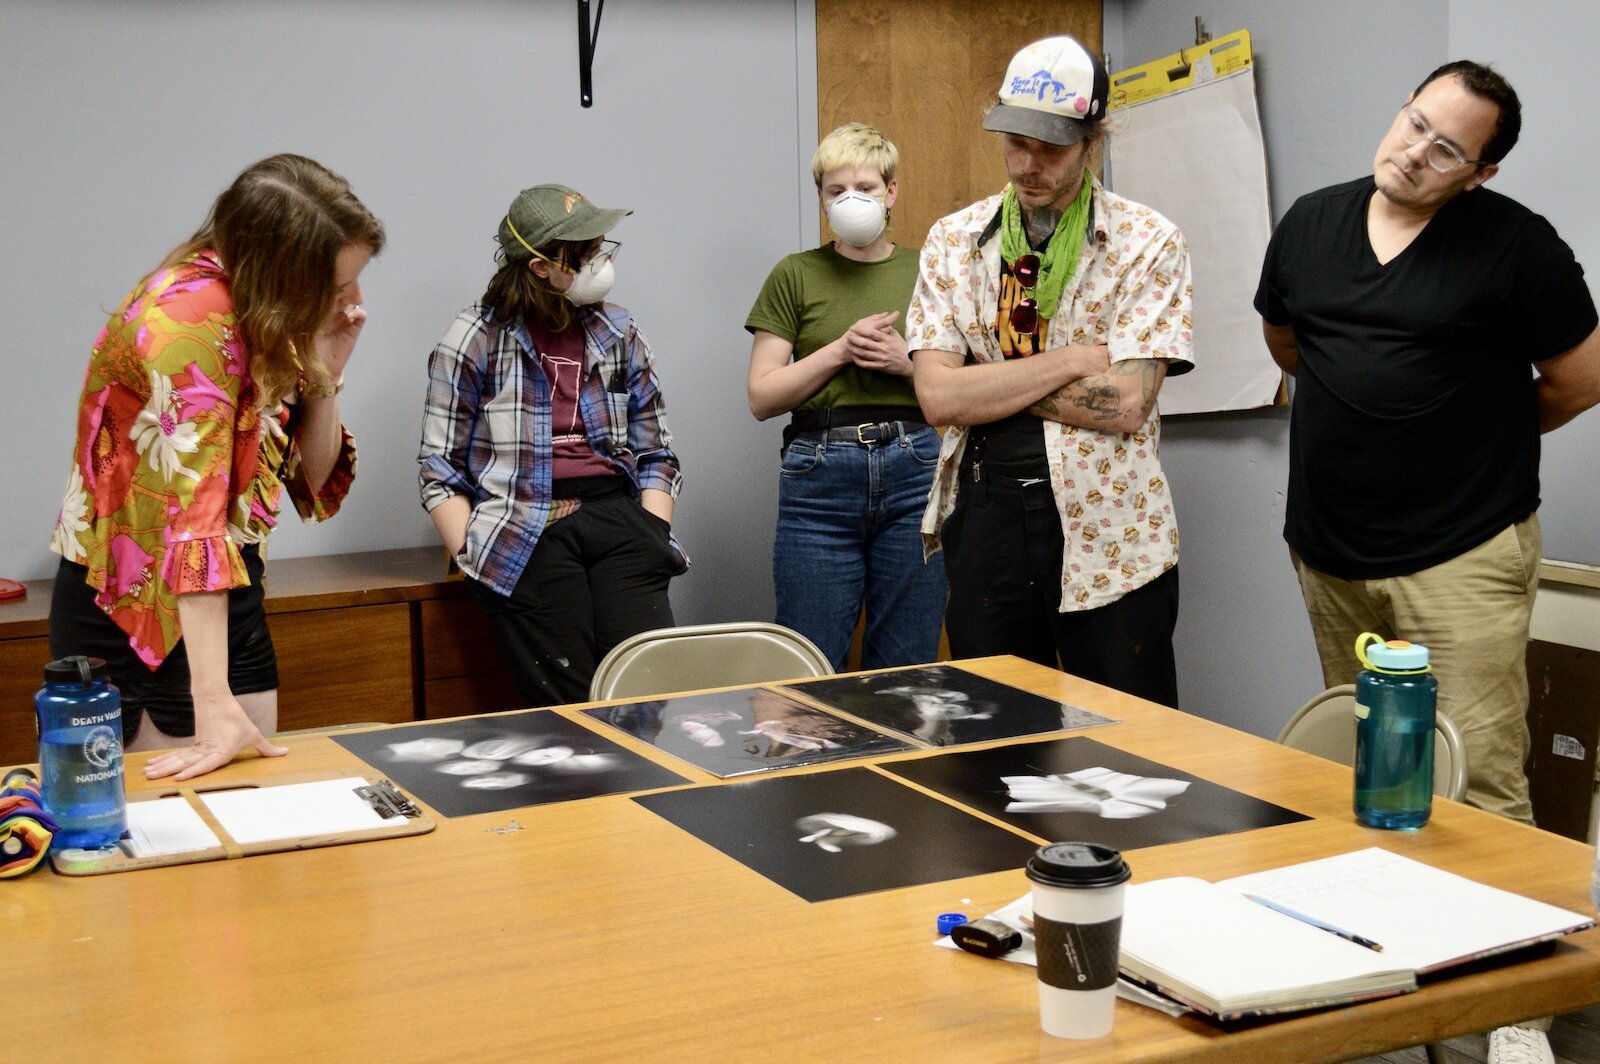 Ellen Nelson, Qynce Chumley, Marissa Klee-Peregon, Daniel Staggs and C. J. Kins examine Klee-Peregon's scanner images of objects.